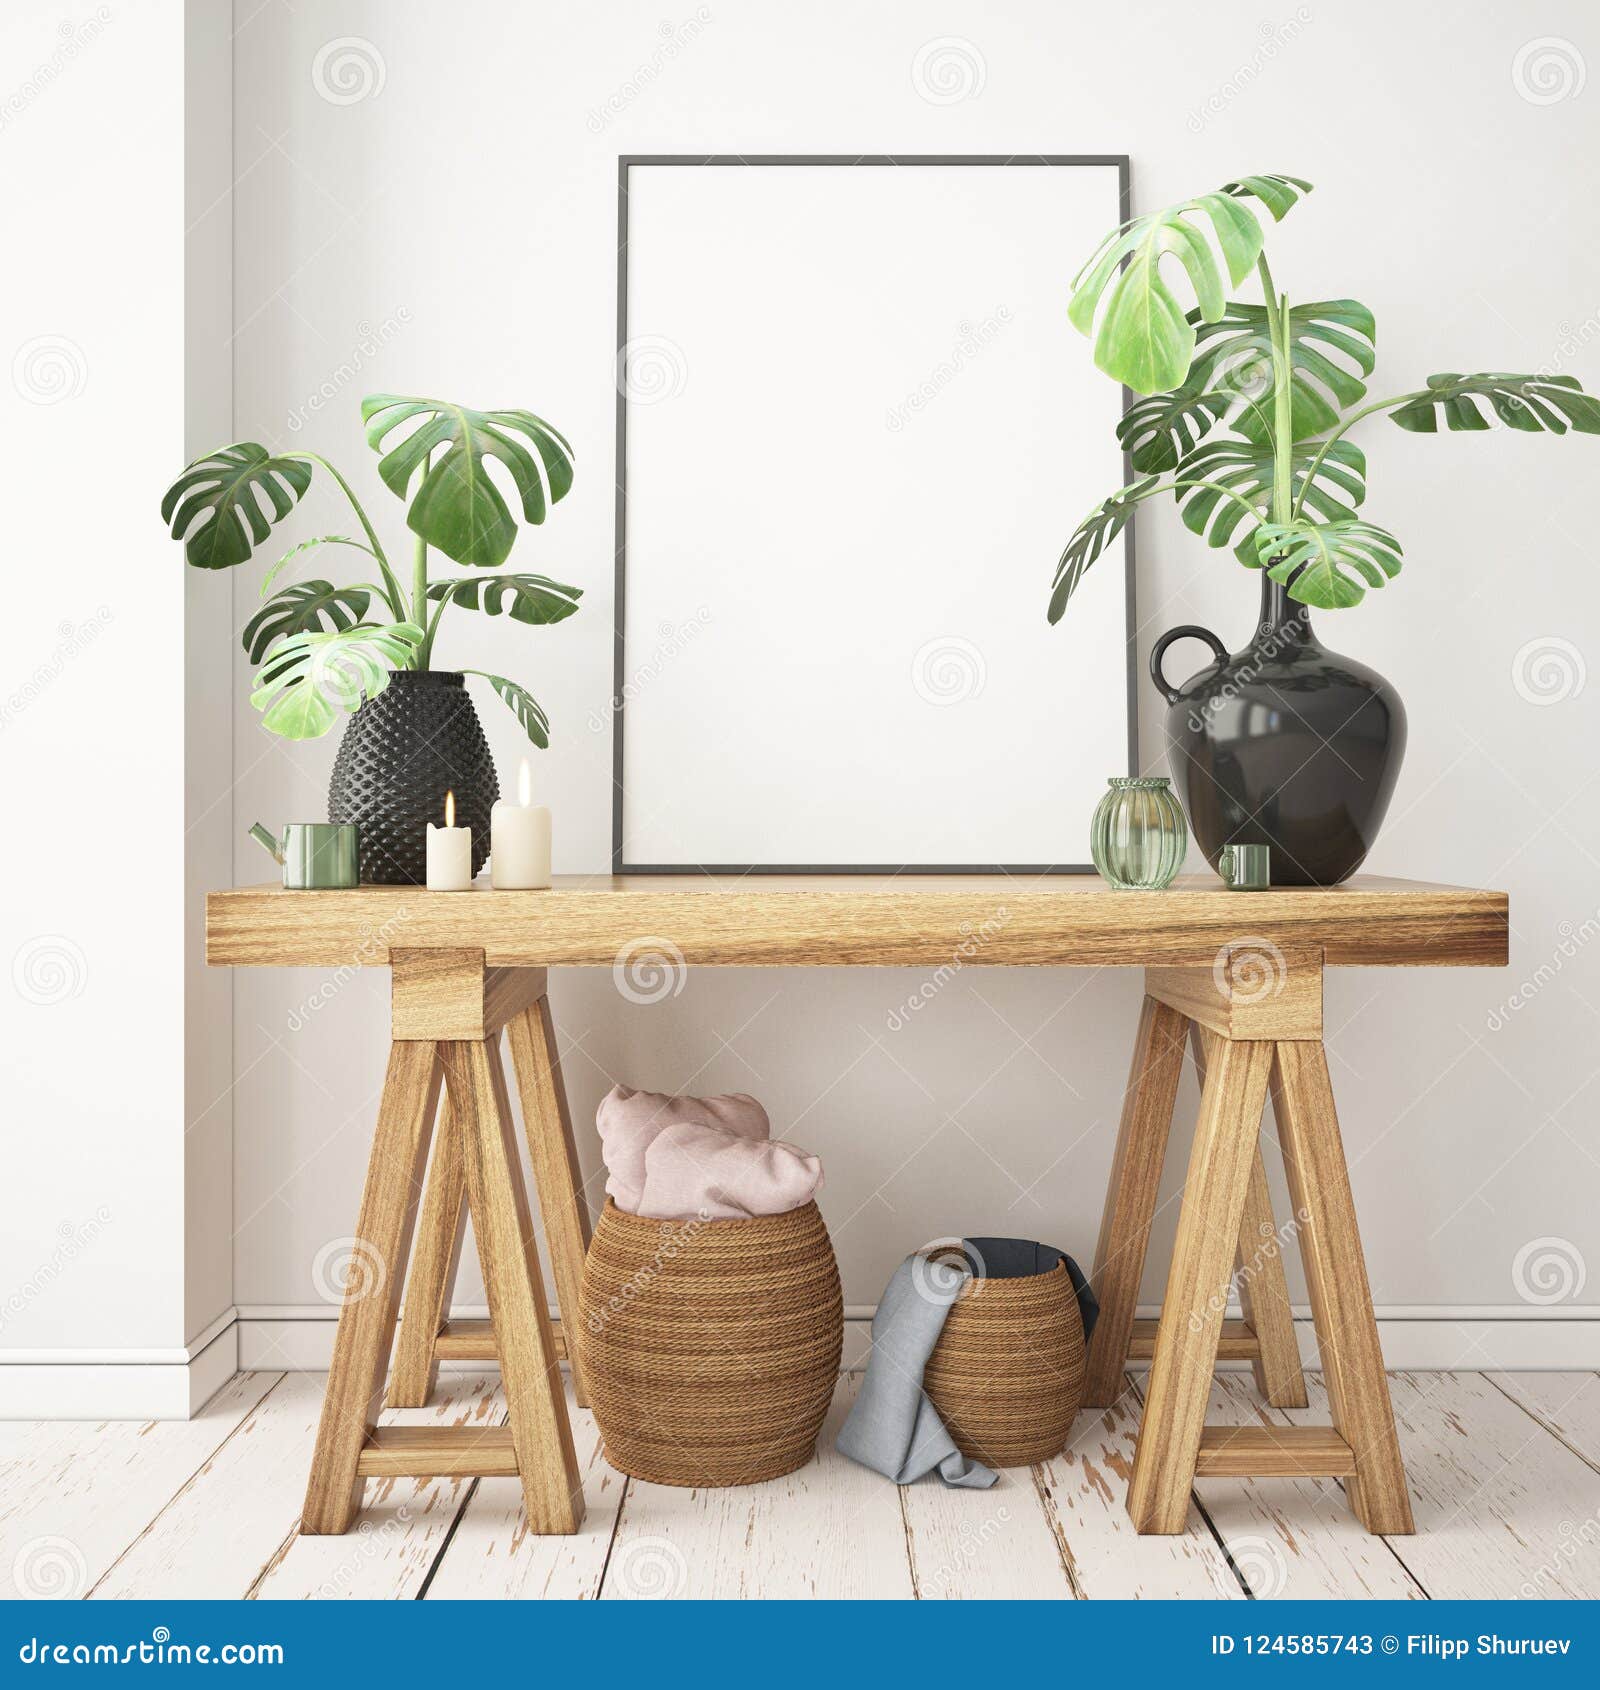 mockup poster in the scandinavian interior with a console table in lagom style.